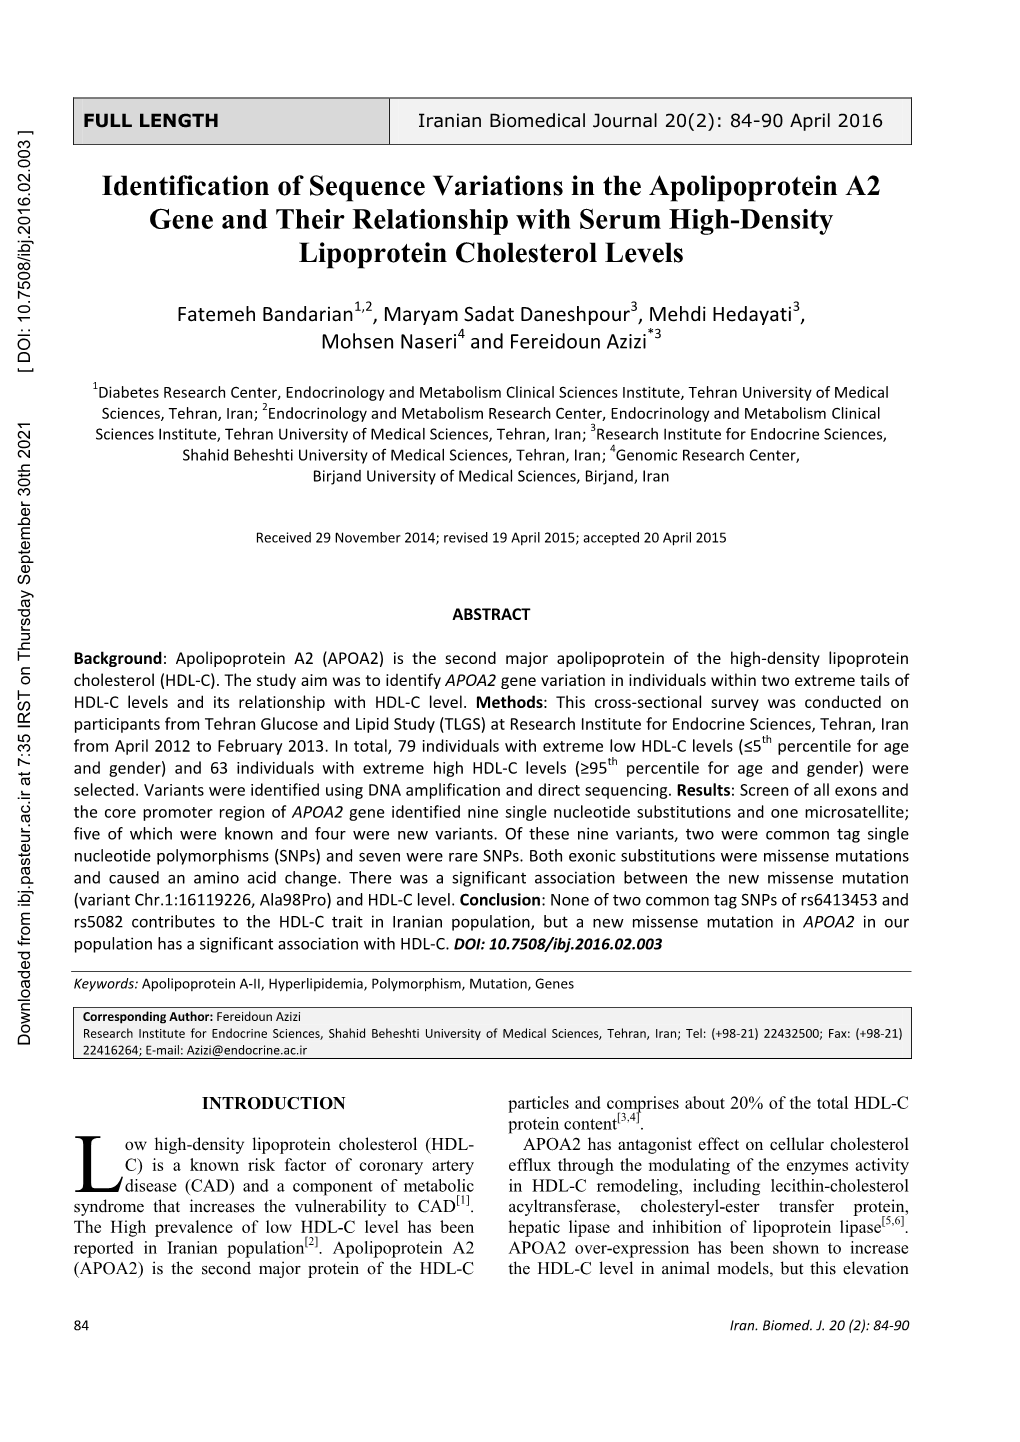 Identification of Sequence Variation in the Apolipoprotein A2 Gene and Their Relationship with Serum High-Density Lipoprotein Ch